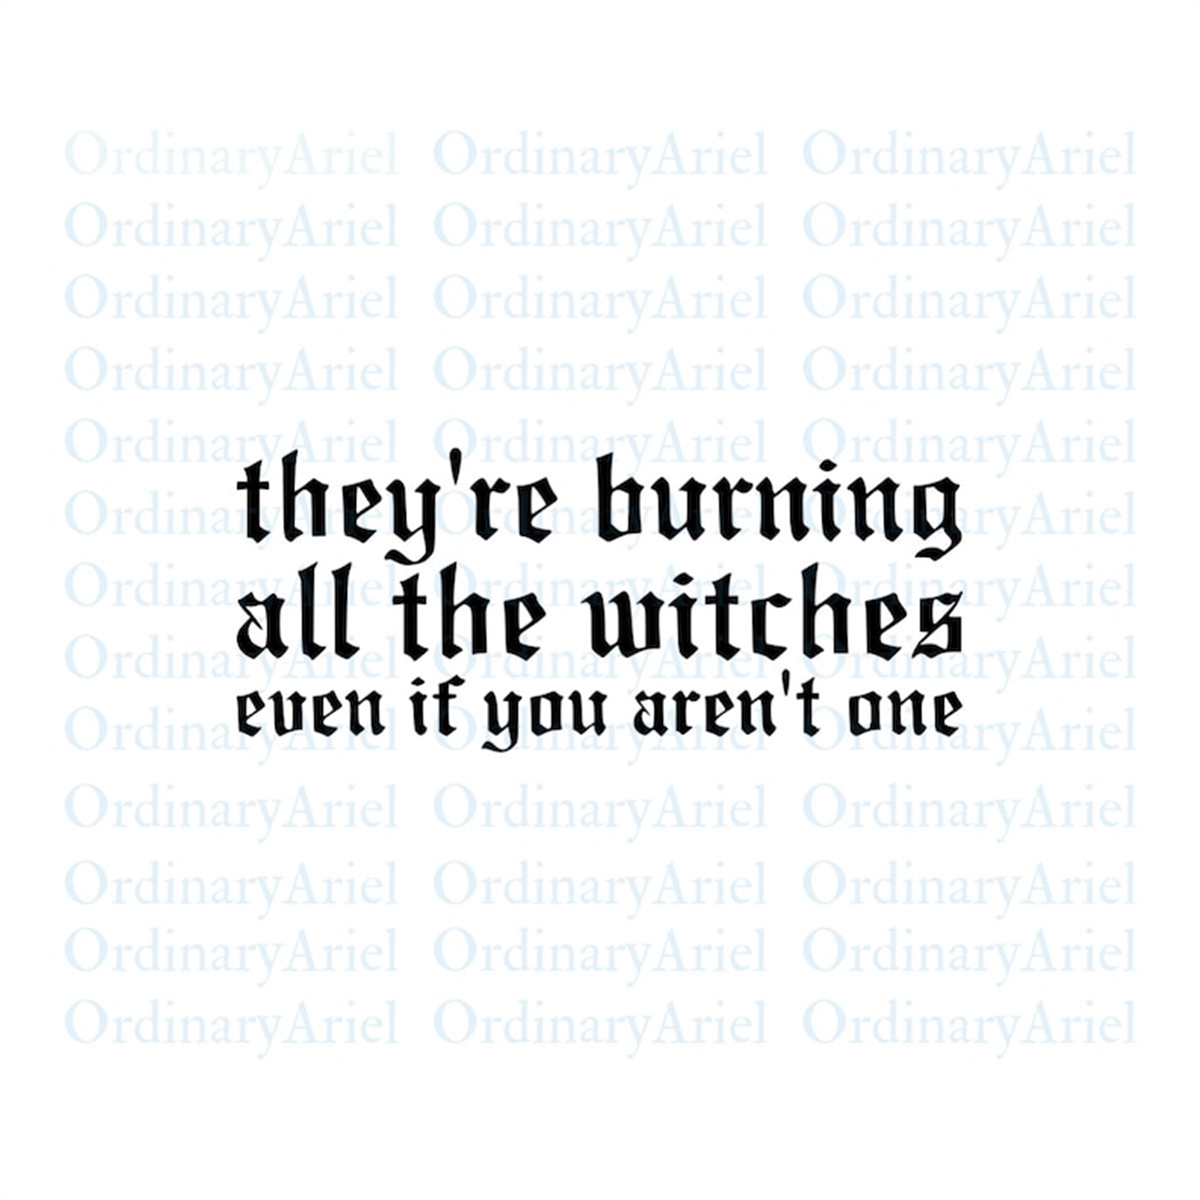 theyre-burning-all-the-witches-even-if-you-arent-one-image-1